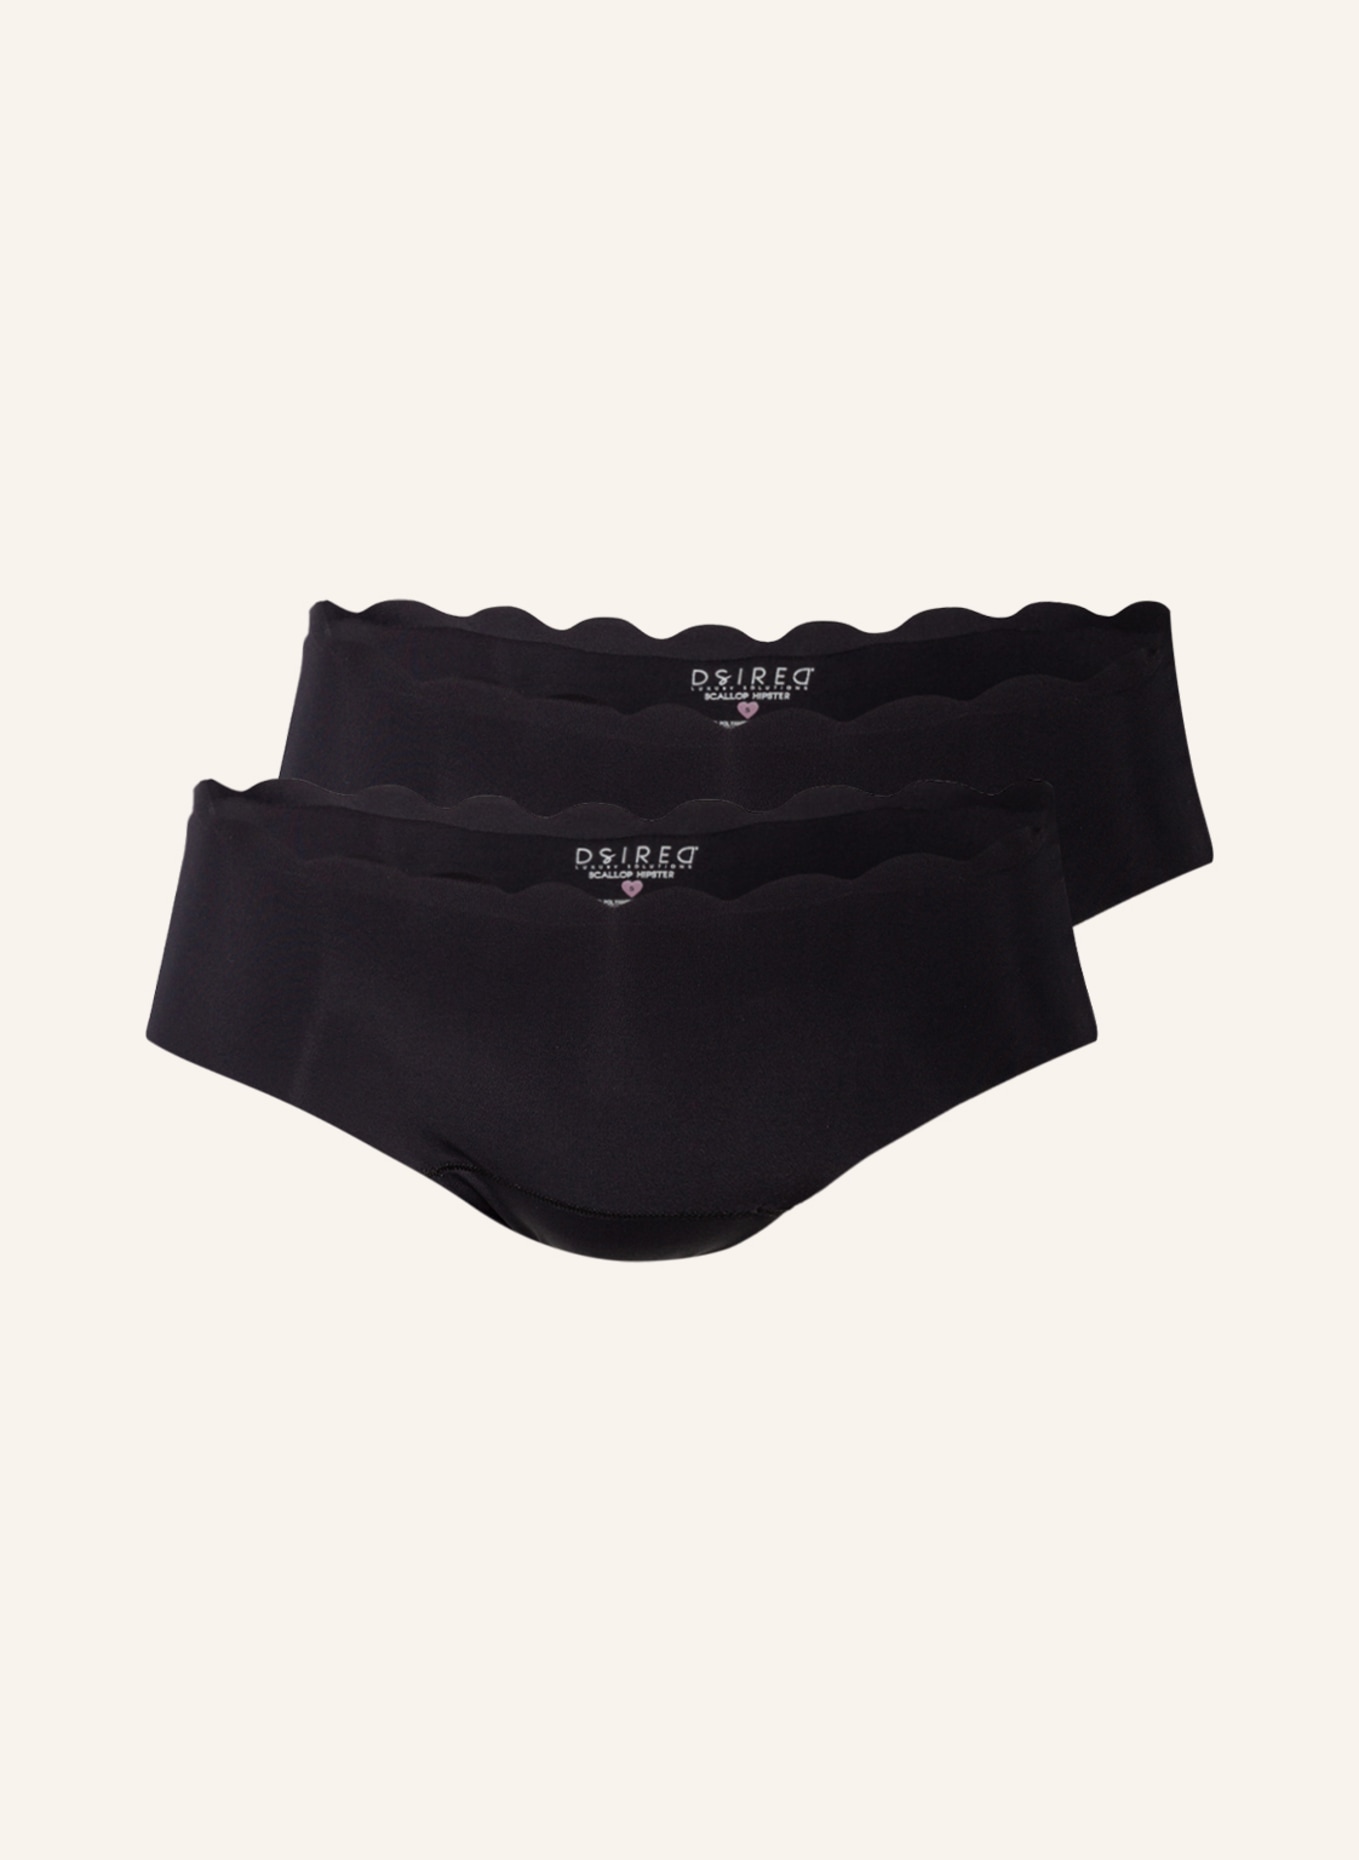 MAGIC Bodyfashion  Dream Invisibles Panty 2-Pack in Black